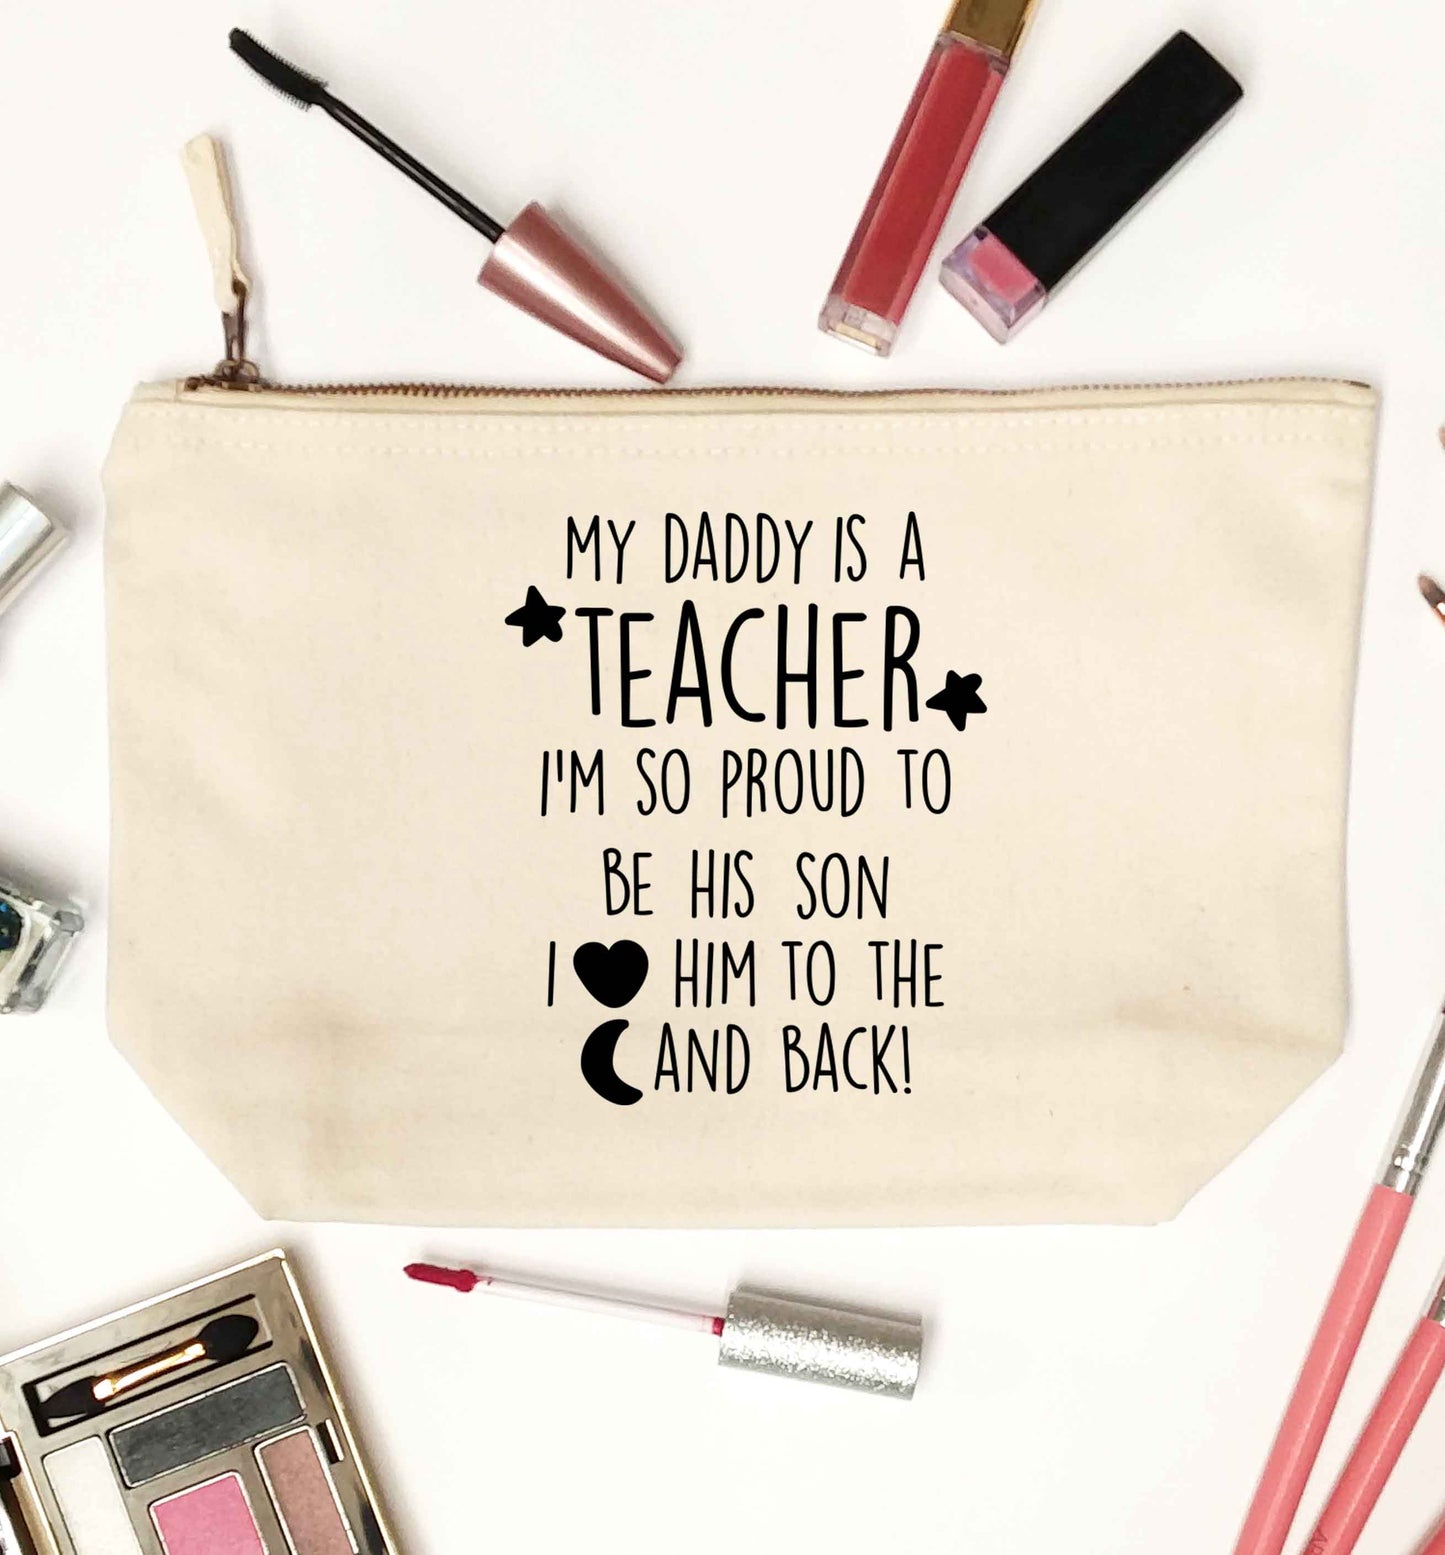 My daddy is a teacher I'm so proud to be his son I love her to the moon and back natural makeup bag